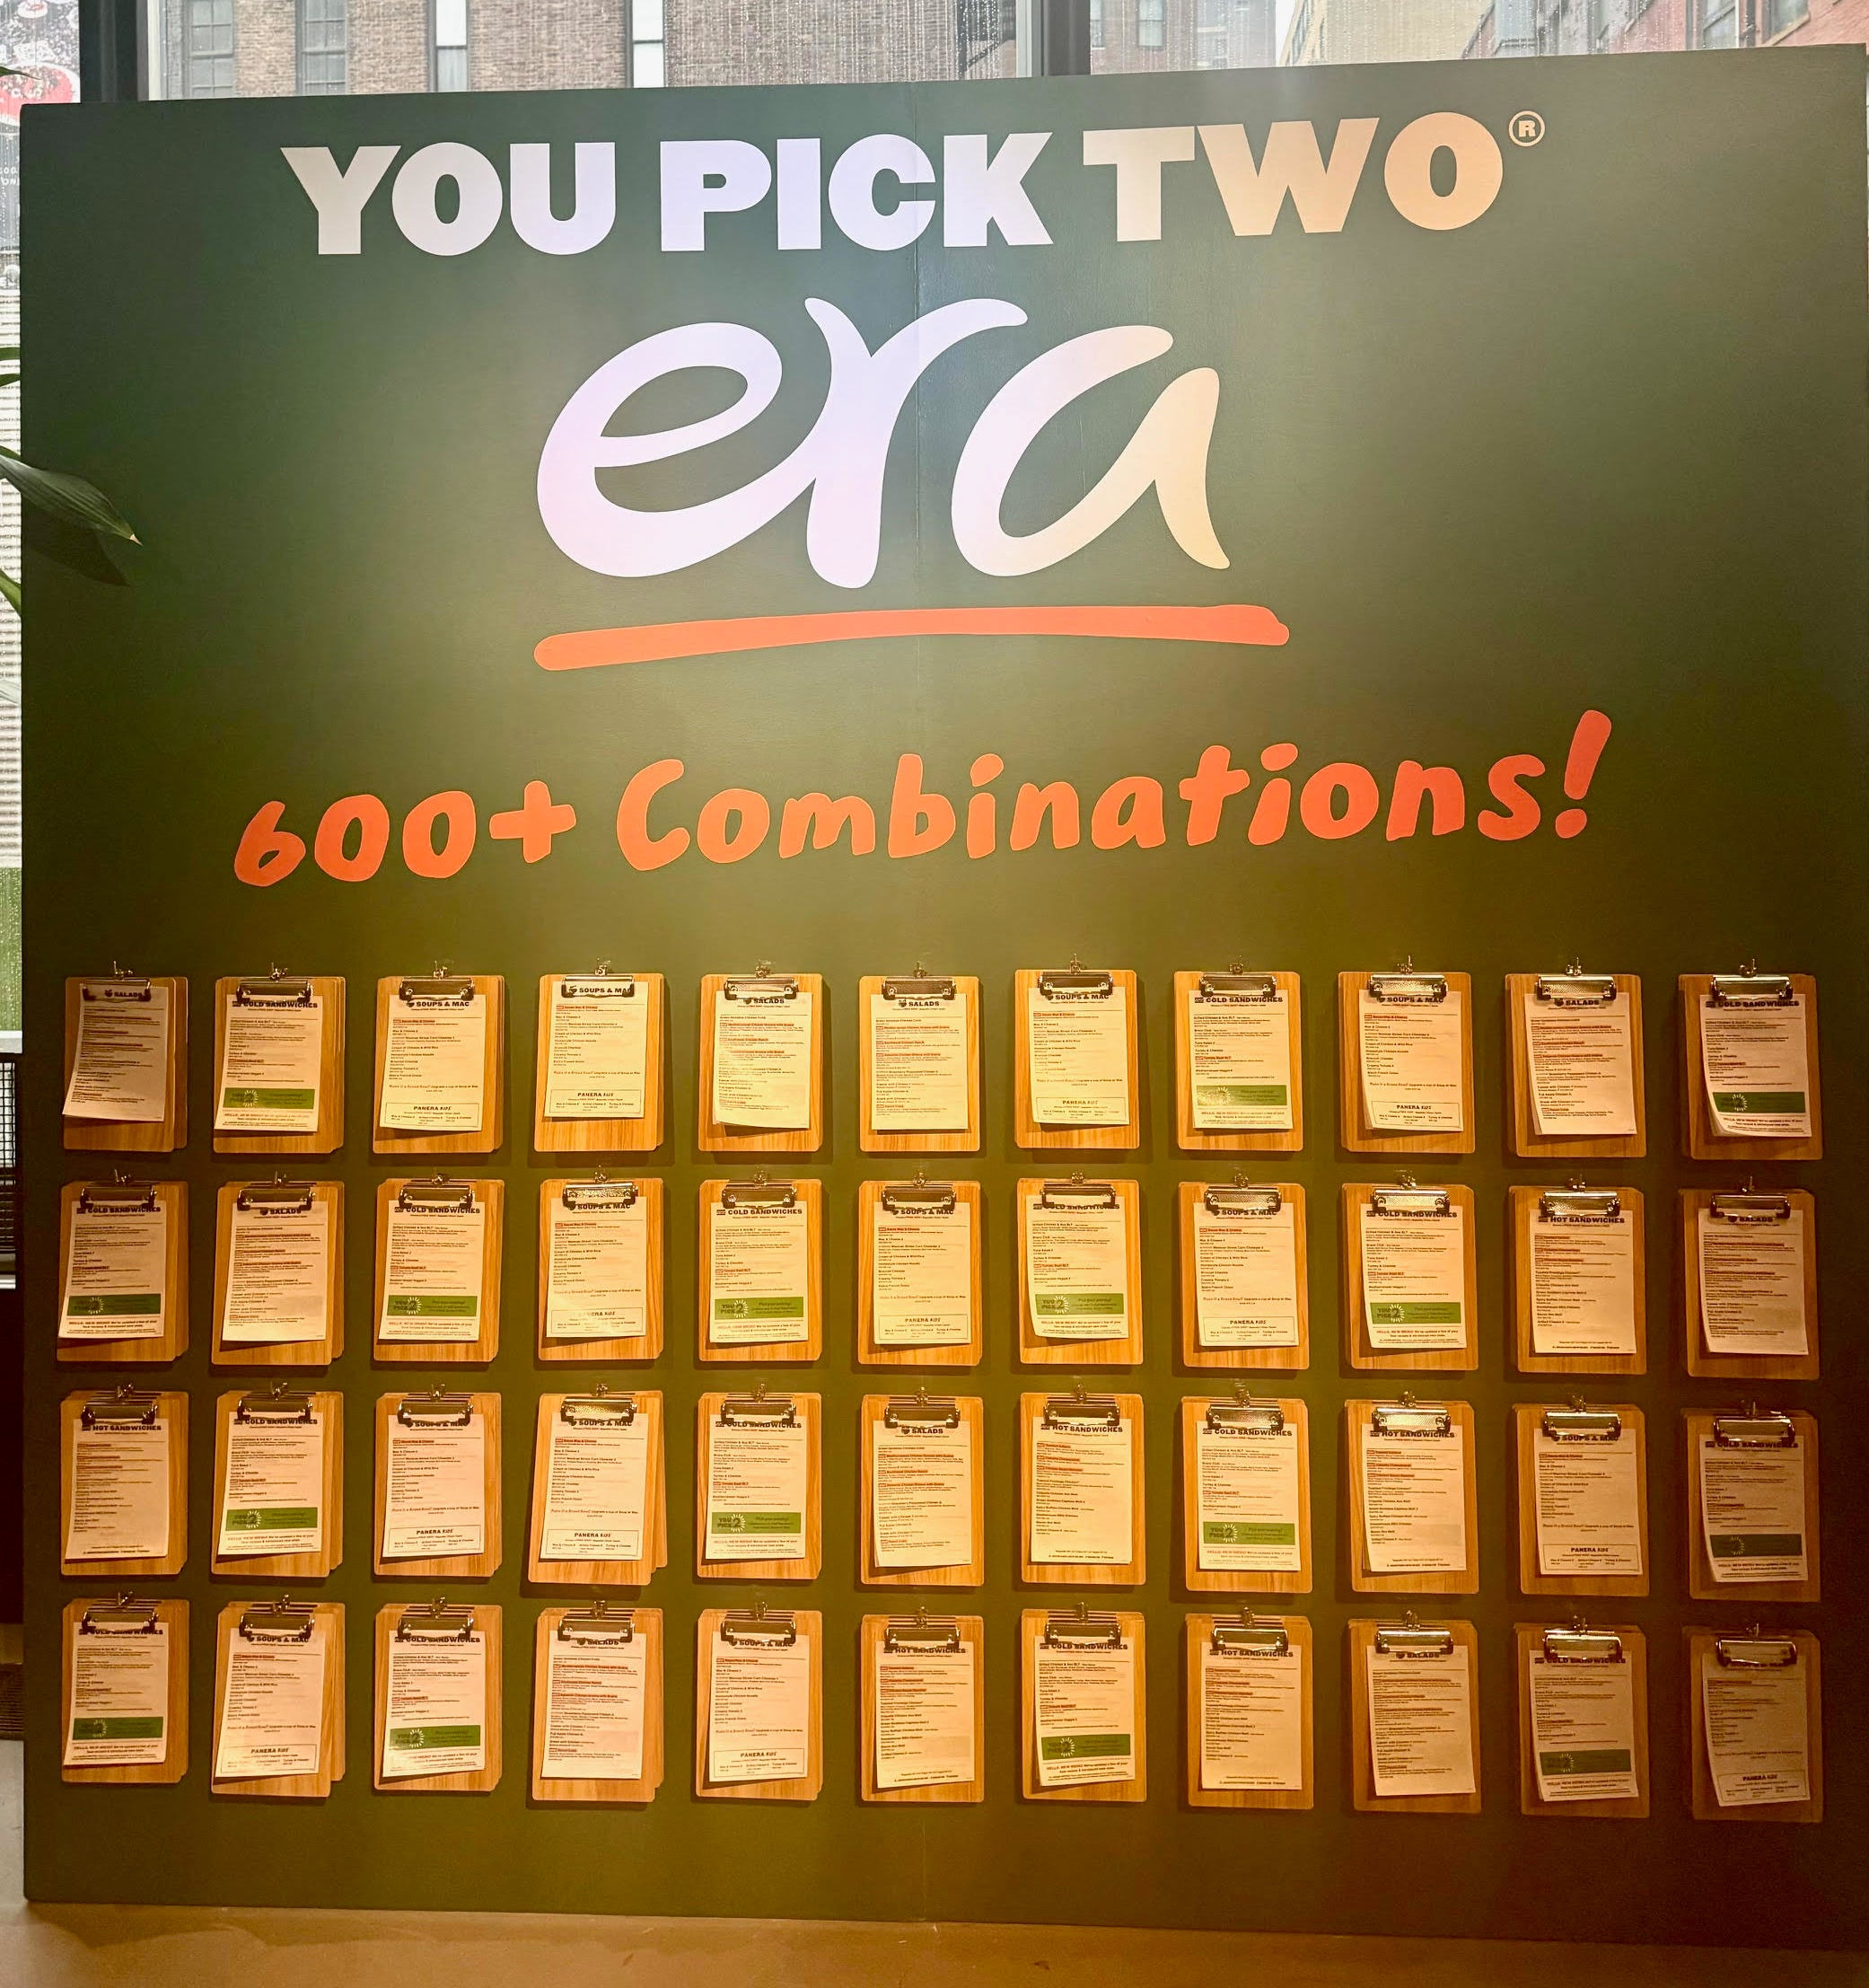 Board showcasing &#x27;YOU PICK TWO&#x27; and &#x27;600+ Combinations!&#x27; with multiple menu options below